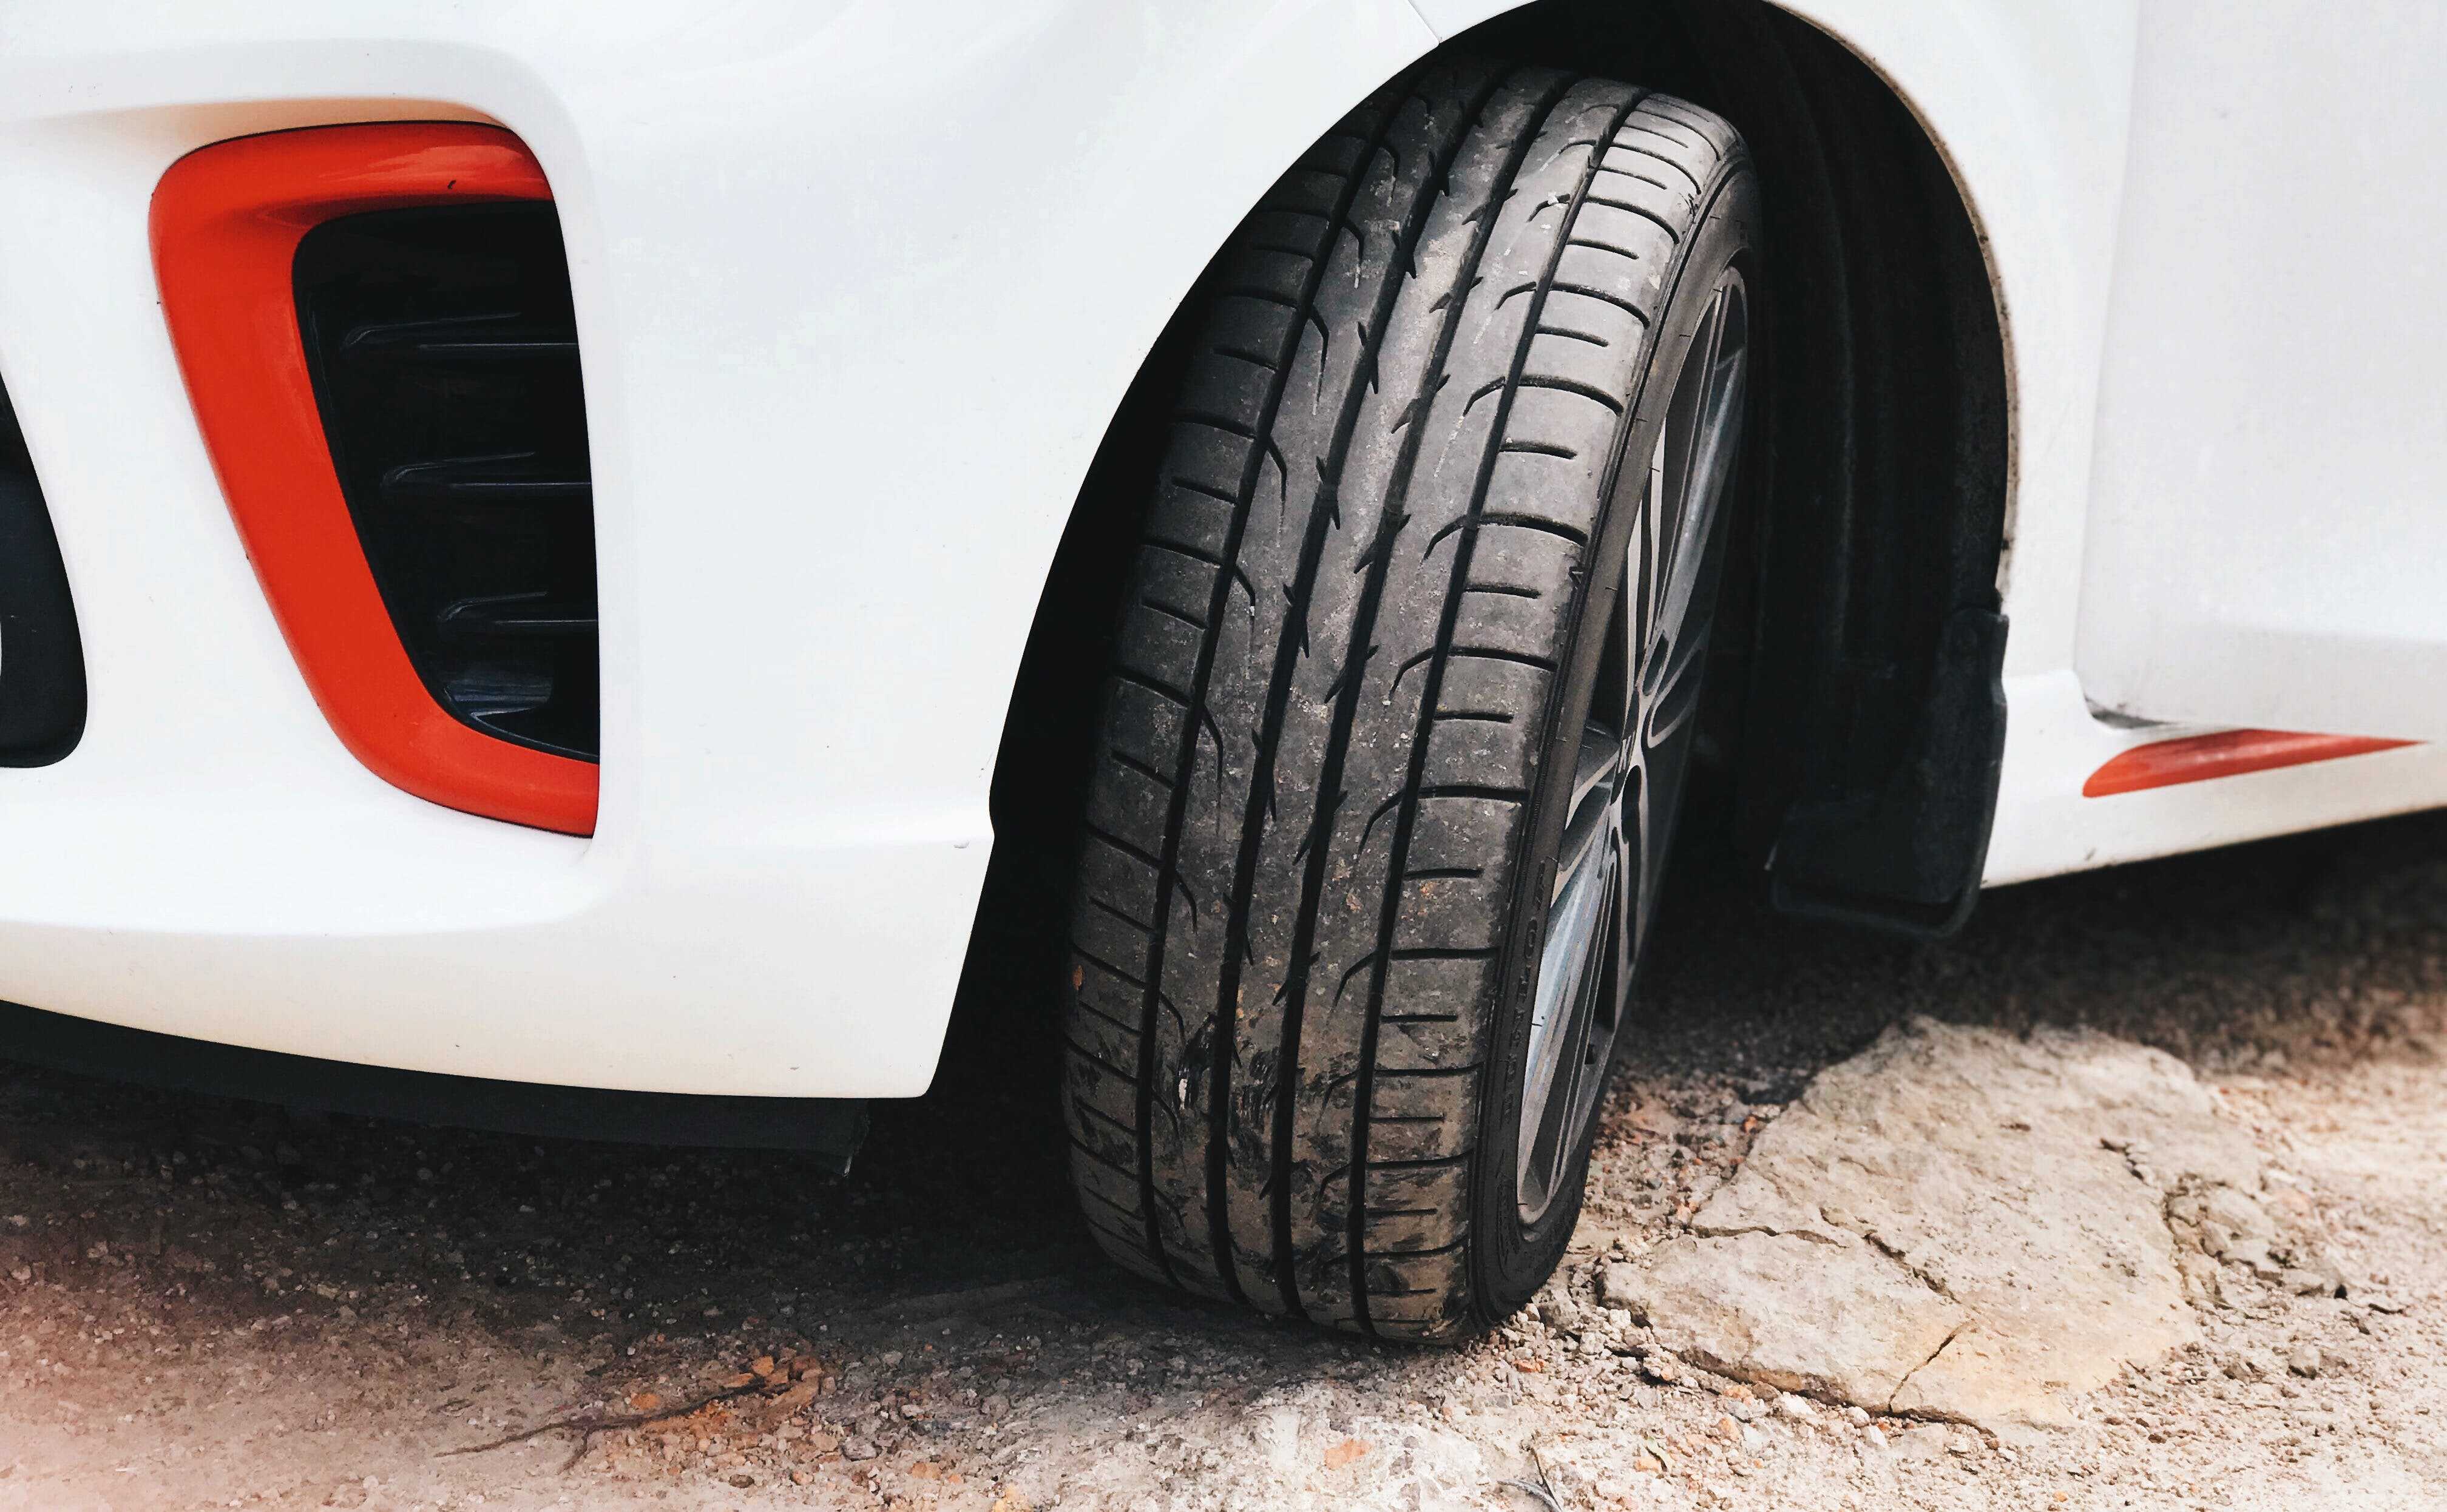 Quick help in the event of a flat tire - Mobile tire service